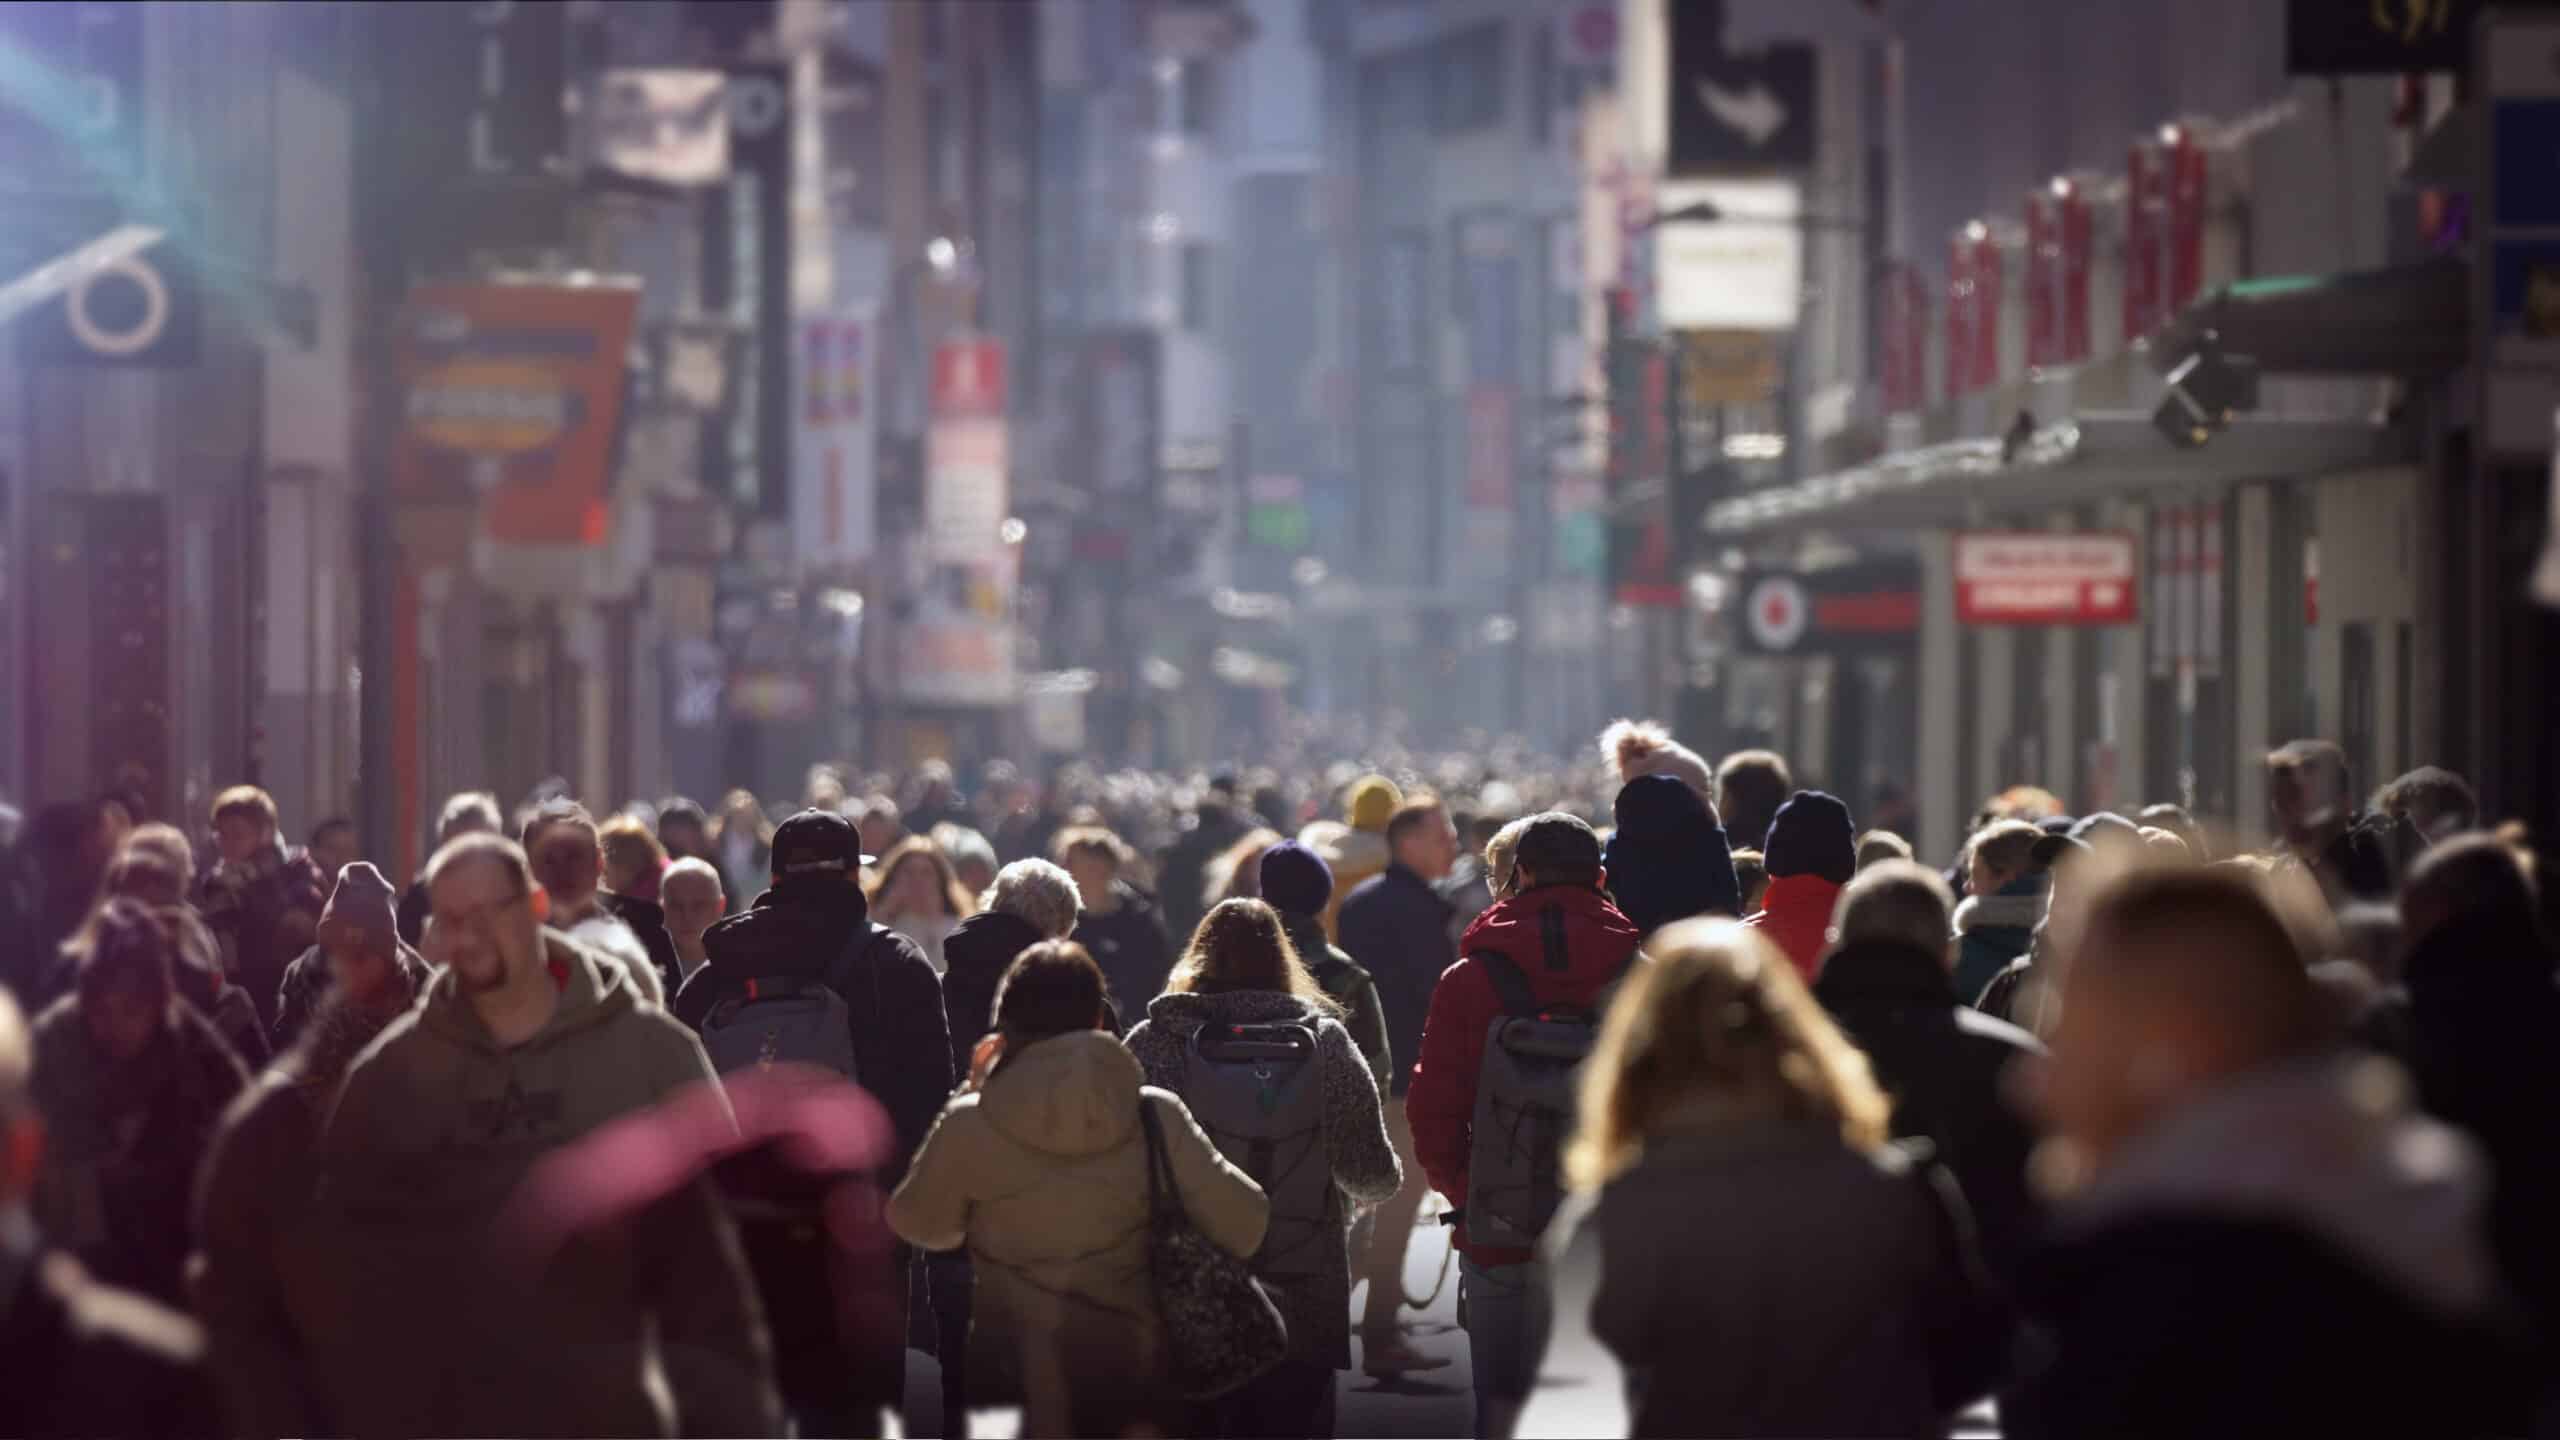 People walking down a crowded city street